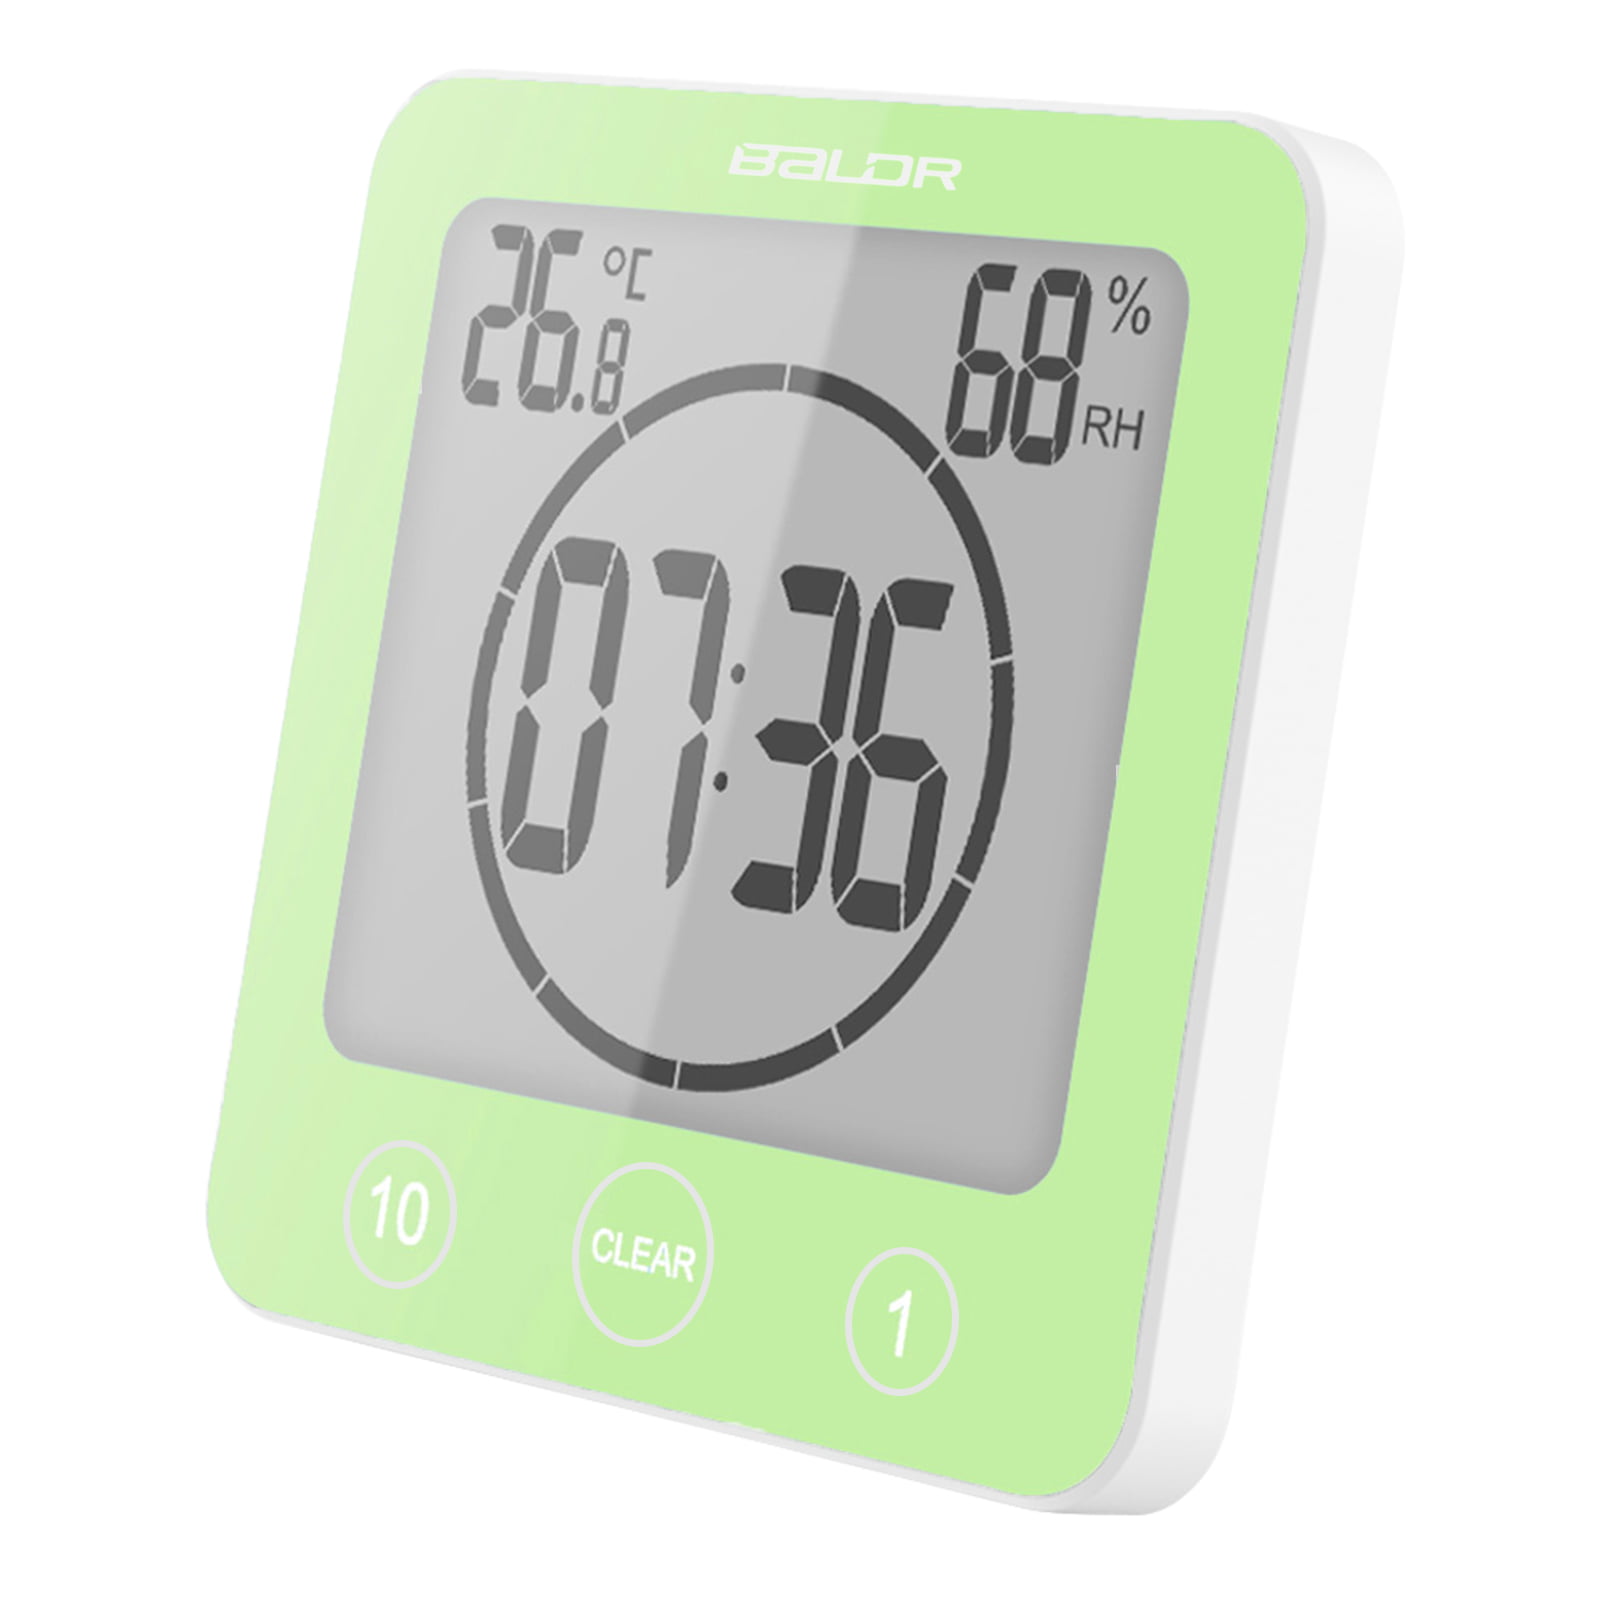 Indoor Humidity Temperature Monitor Digital Hygrometer Humidity Meter with Temperature Humidity Gauge Built-in Clock and Time Display for Temperature Humidity Measurement Sparoma Spa-M0321STH